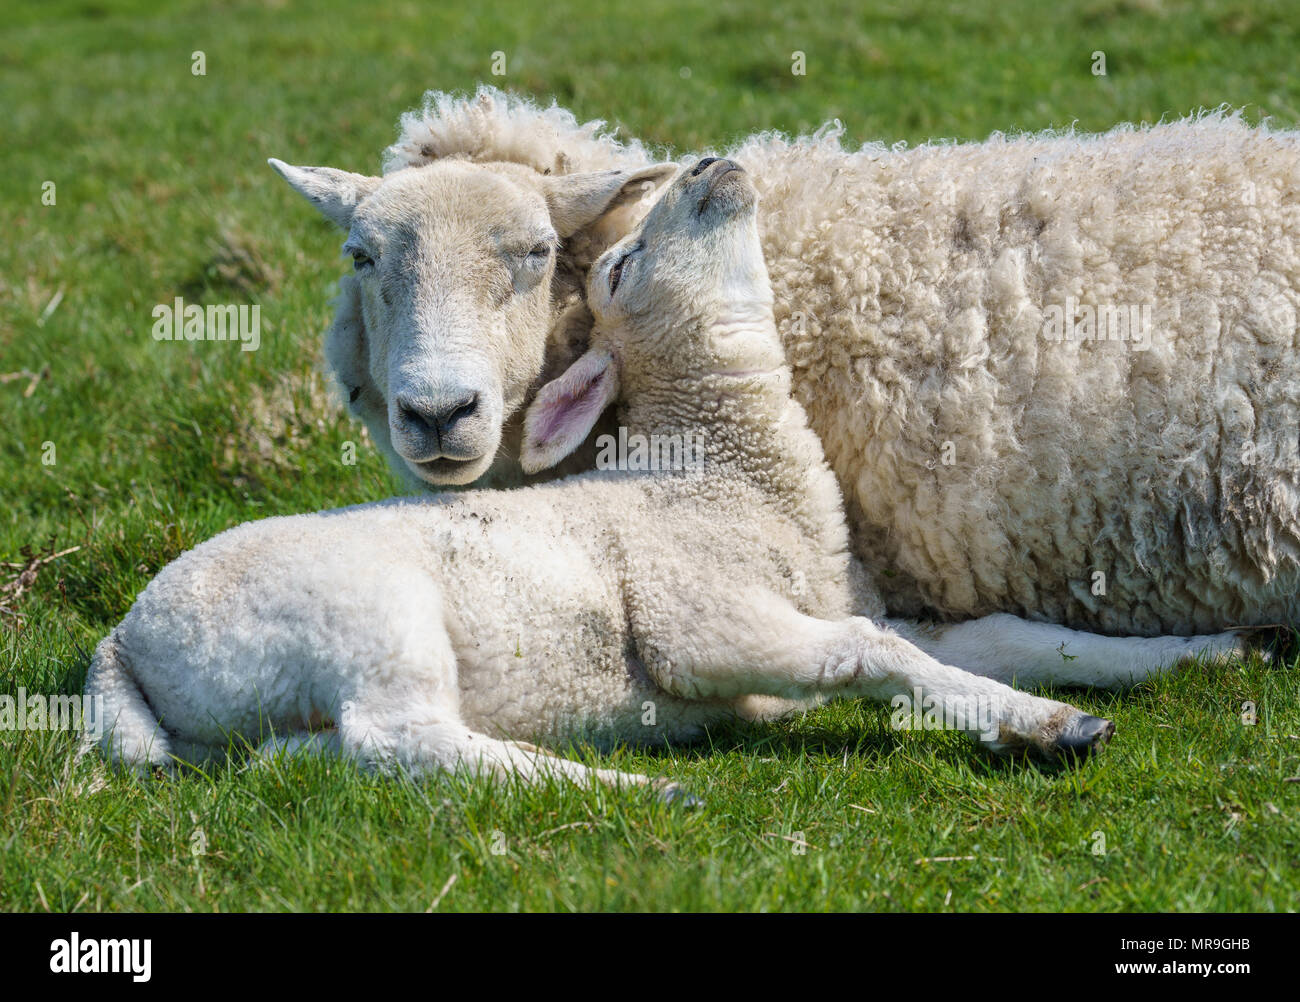 Single new born lamb with ewe relaxed on grass Stock Photo